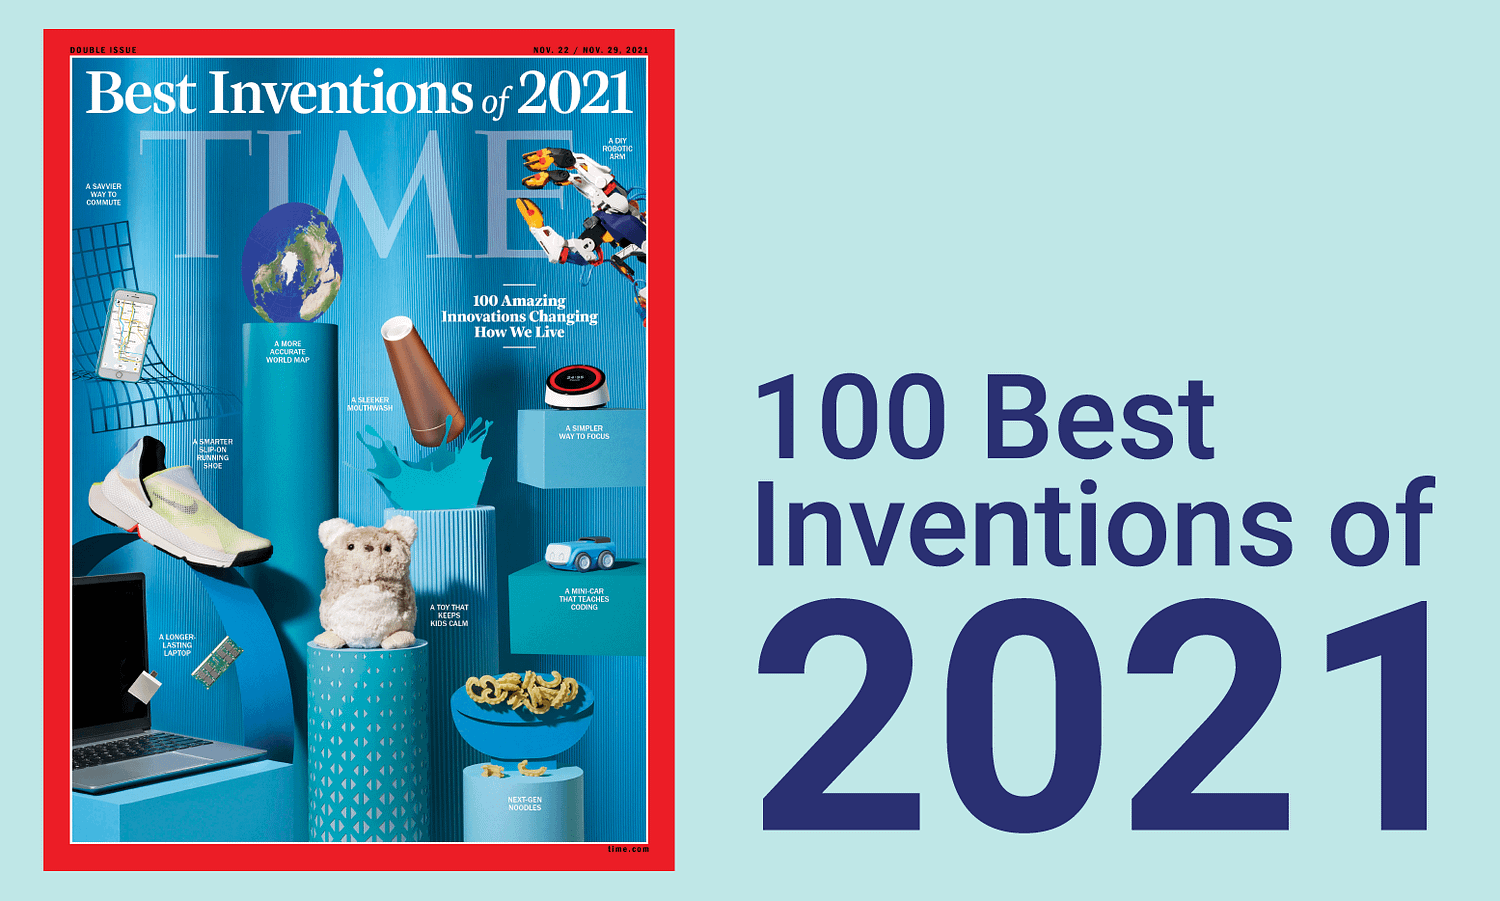 100 Best Inventions of 2021